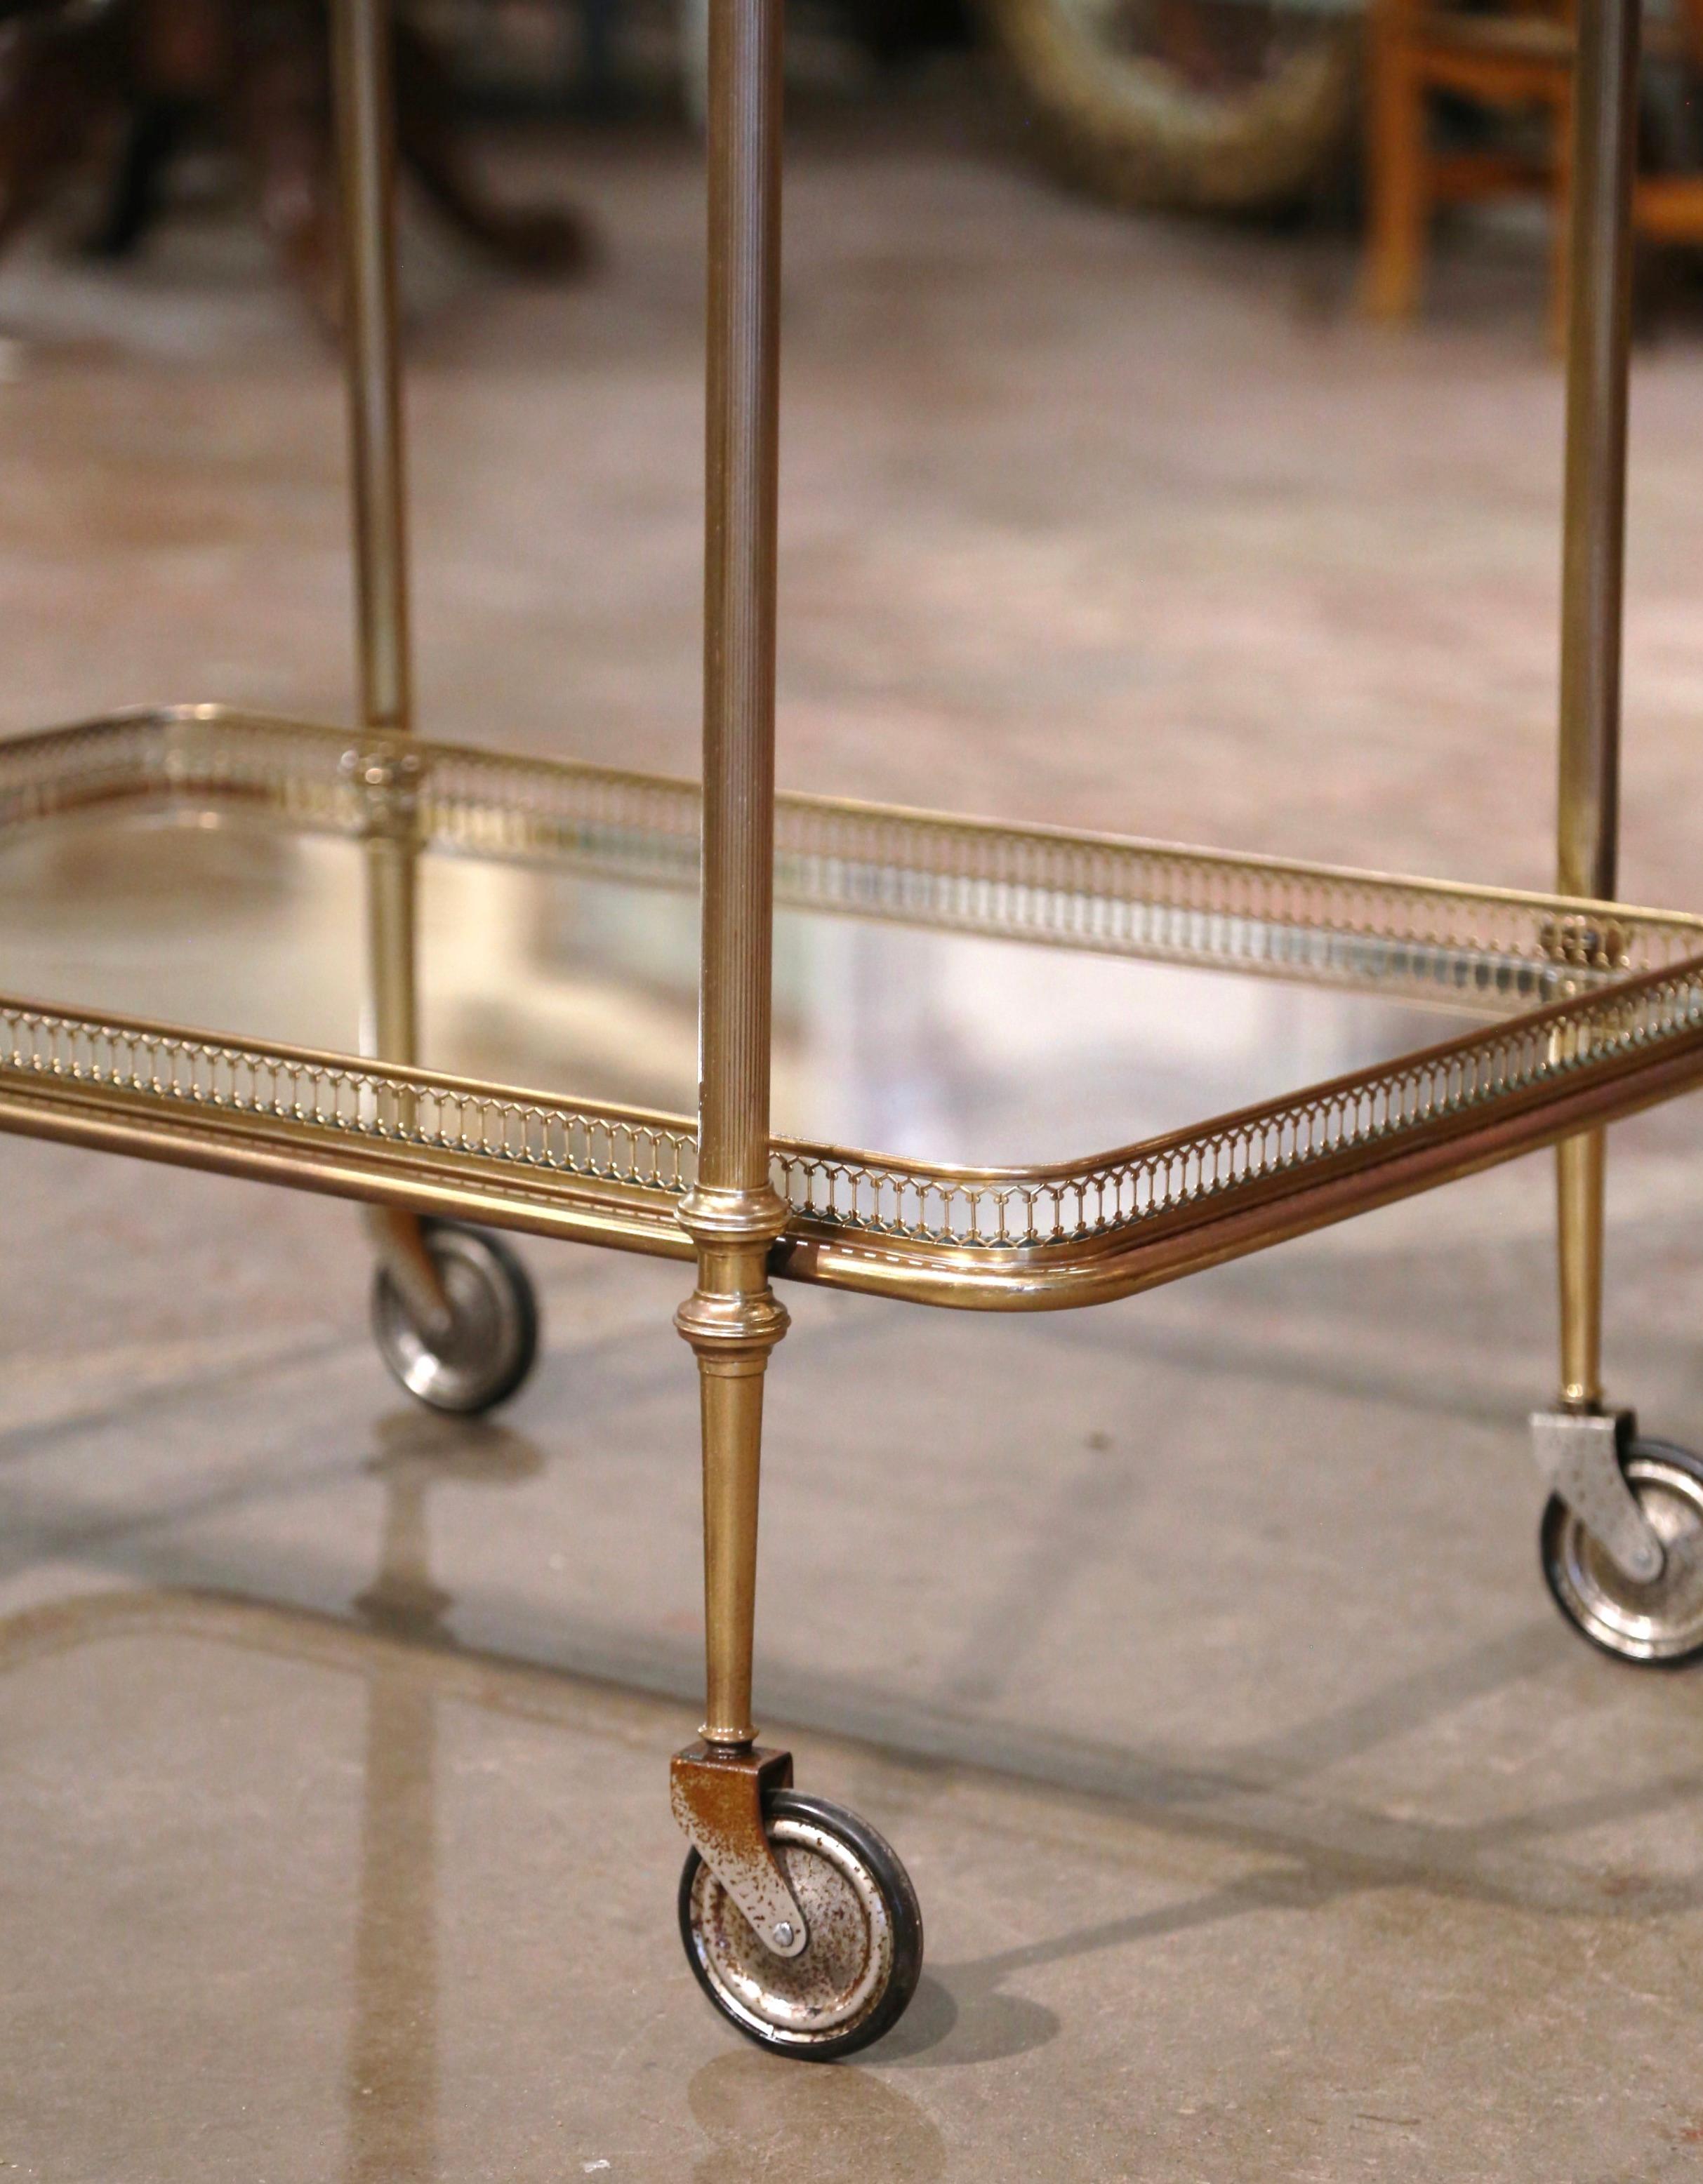 Early 20th Century French Gilt Brass Two-Tier Service Trolley Bar Cart on Wheels 3